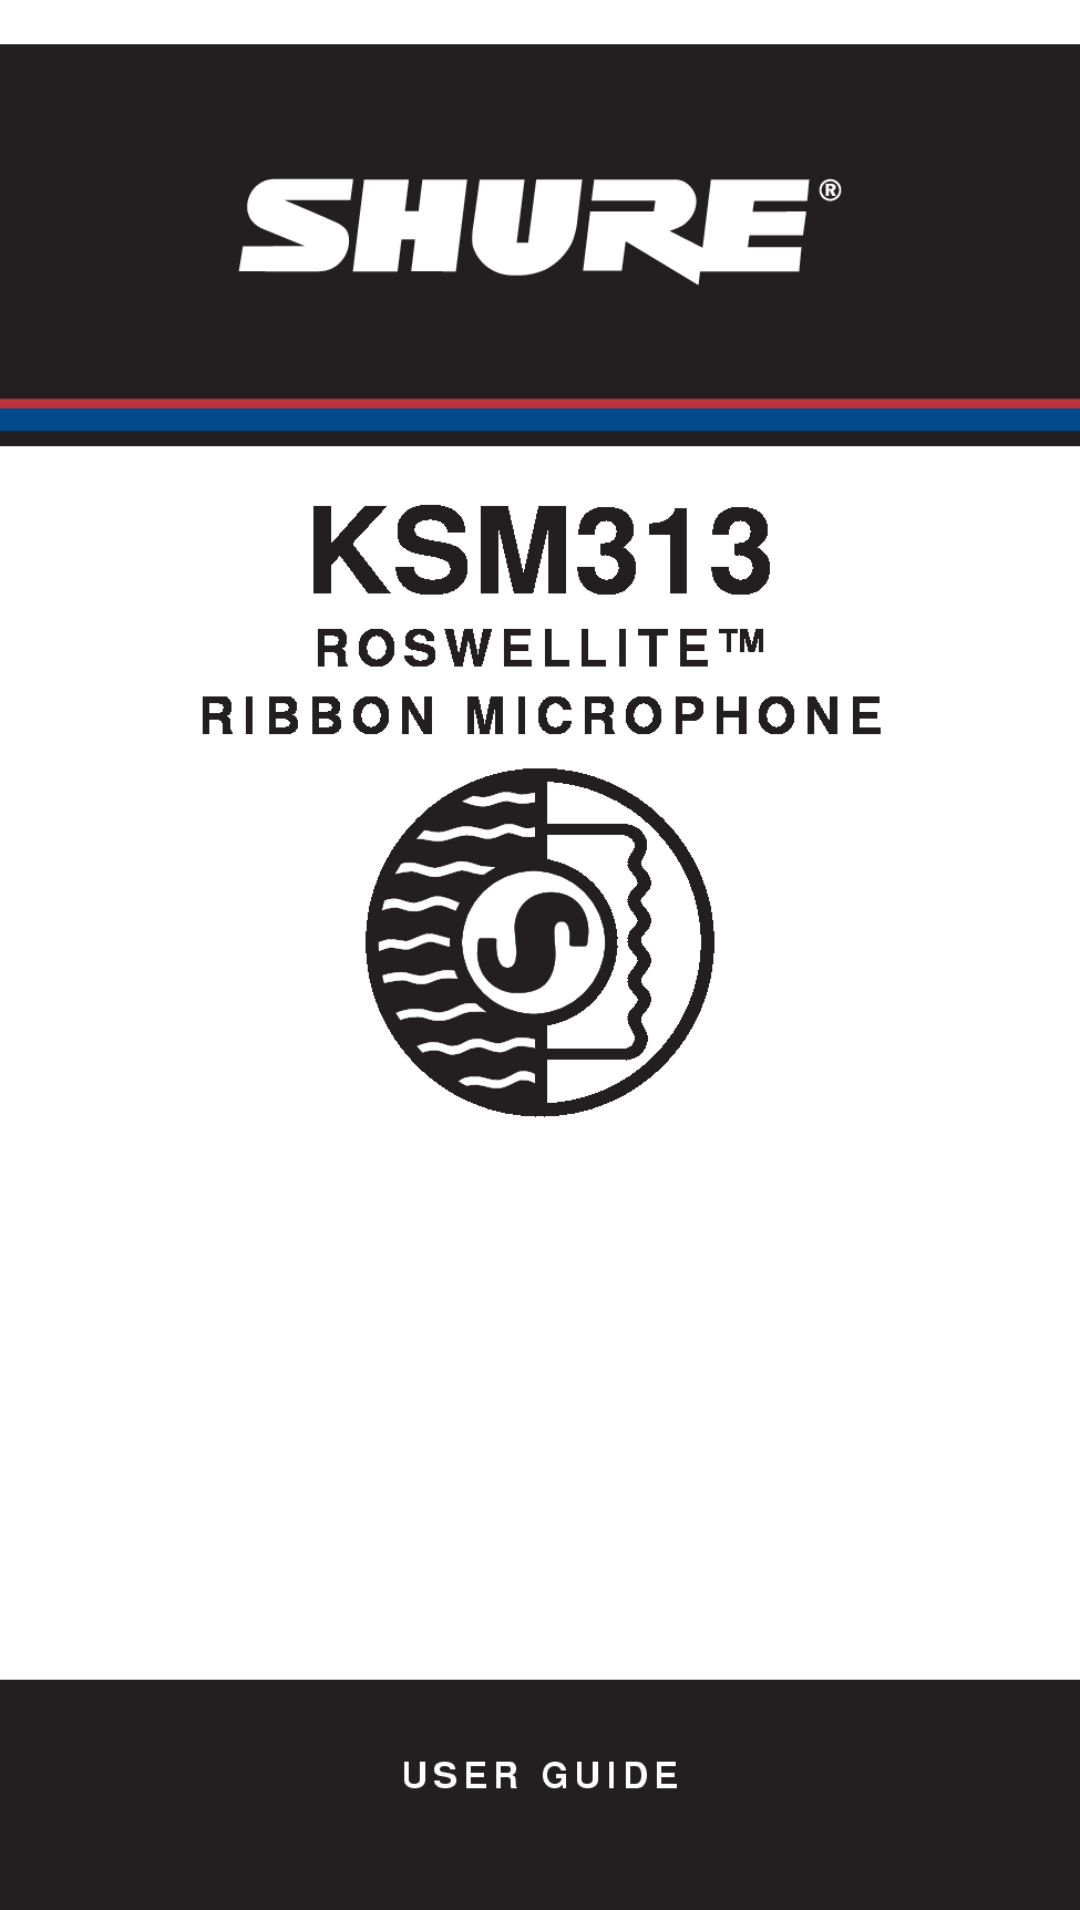 Shure ksm313 manual KSM313, R O S W E L L I T E Ribbon Microphone, User Guide 